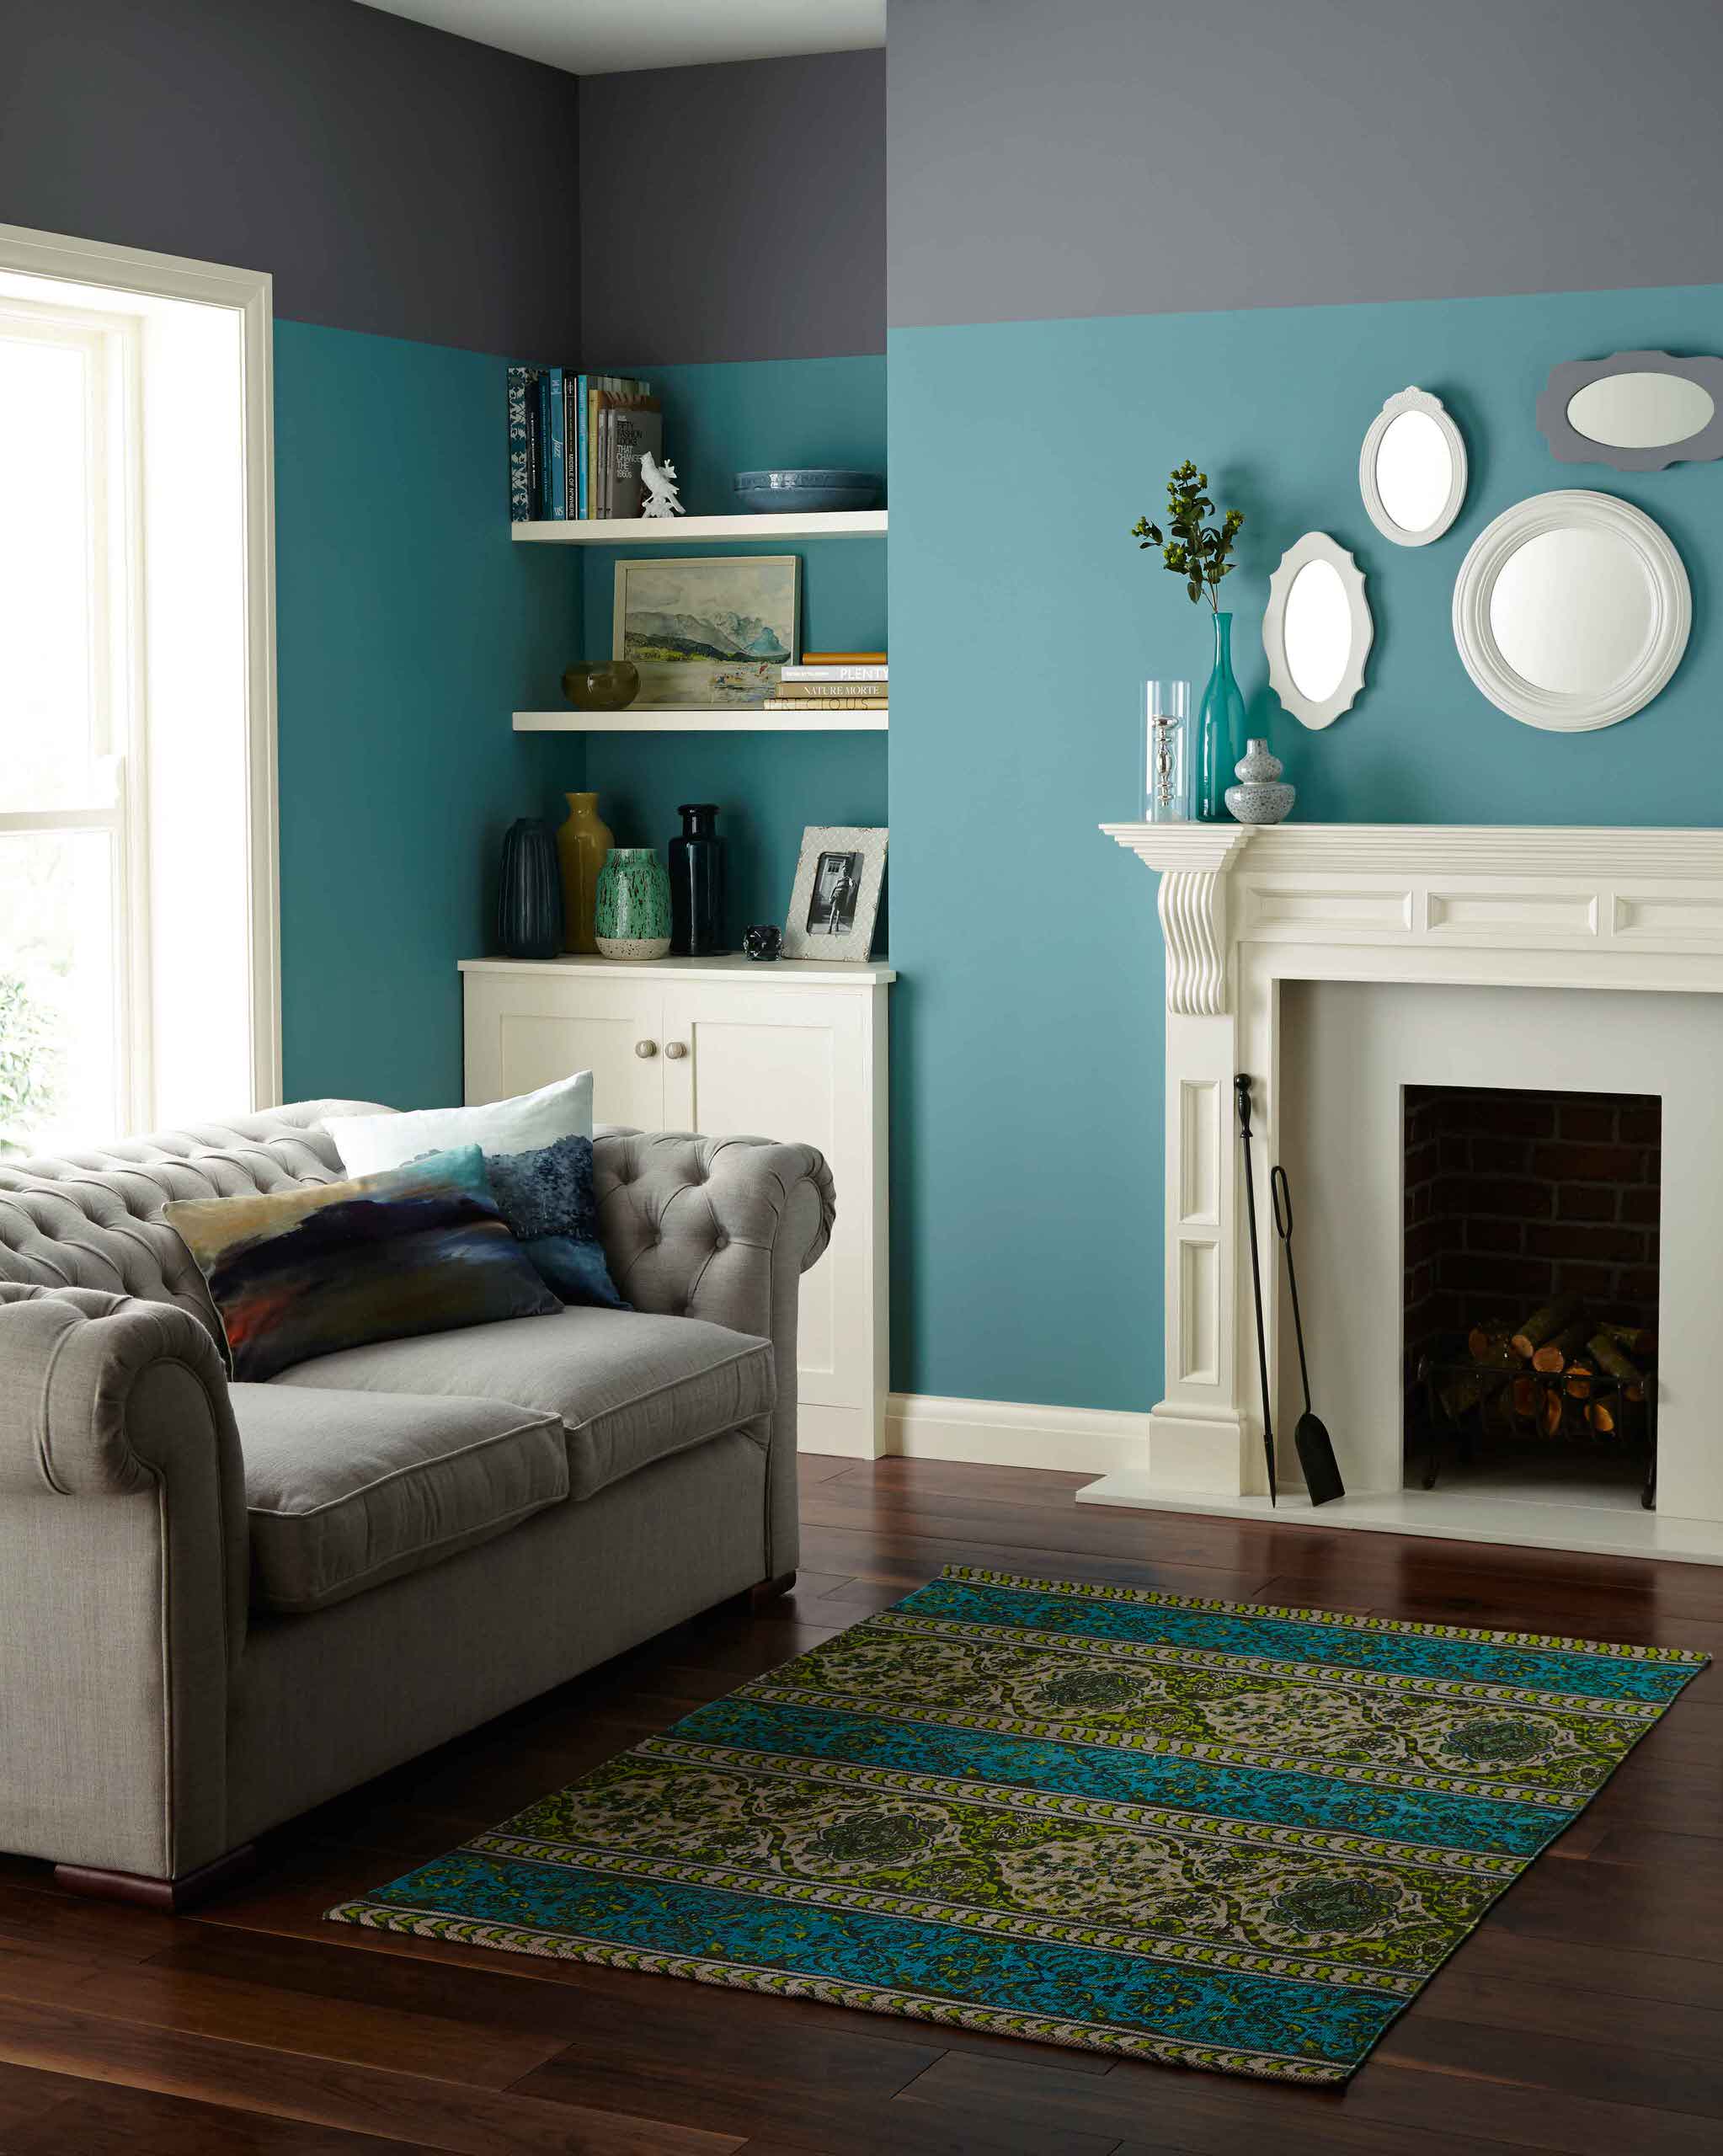 Two Tone Paint Living Room Ideas Photos Houzz